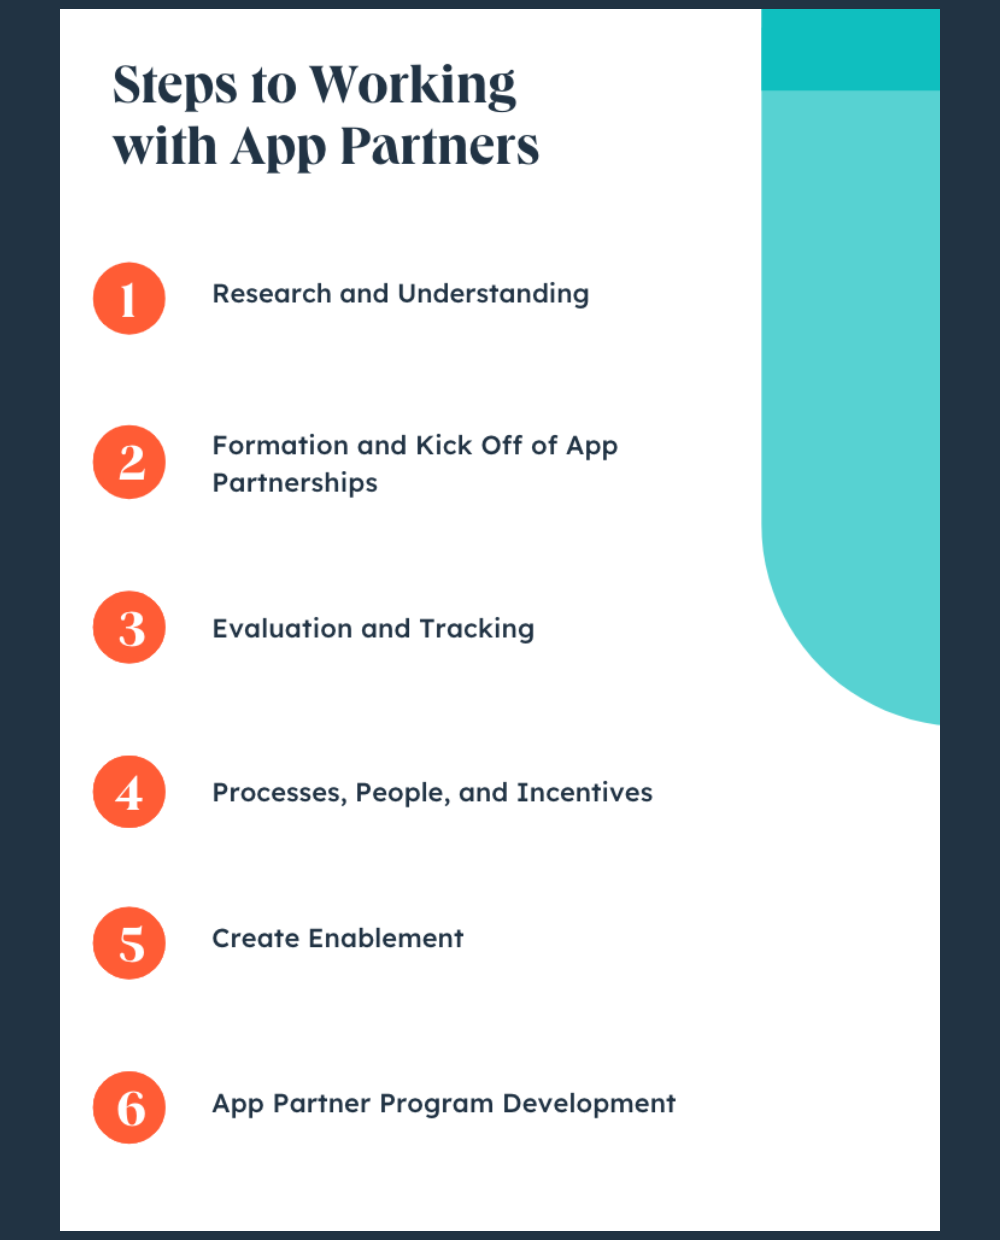 App partner resources page Featured Resources Images (1000 x 1240 px) (2)